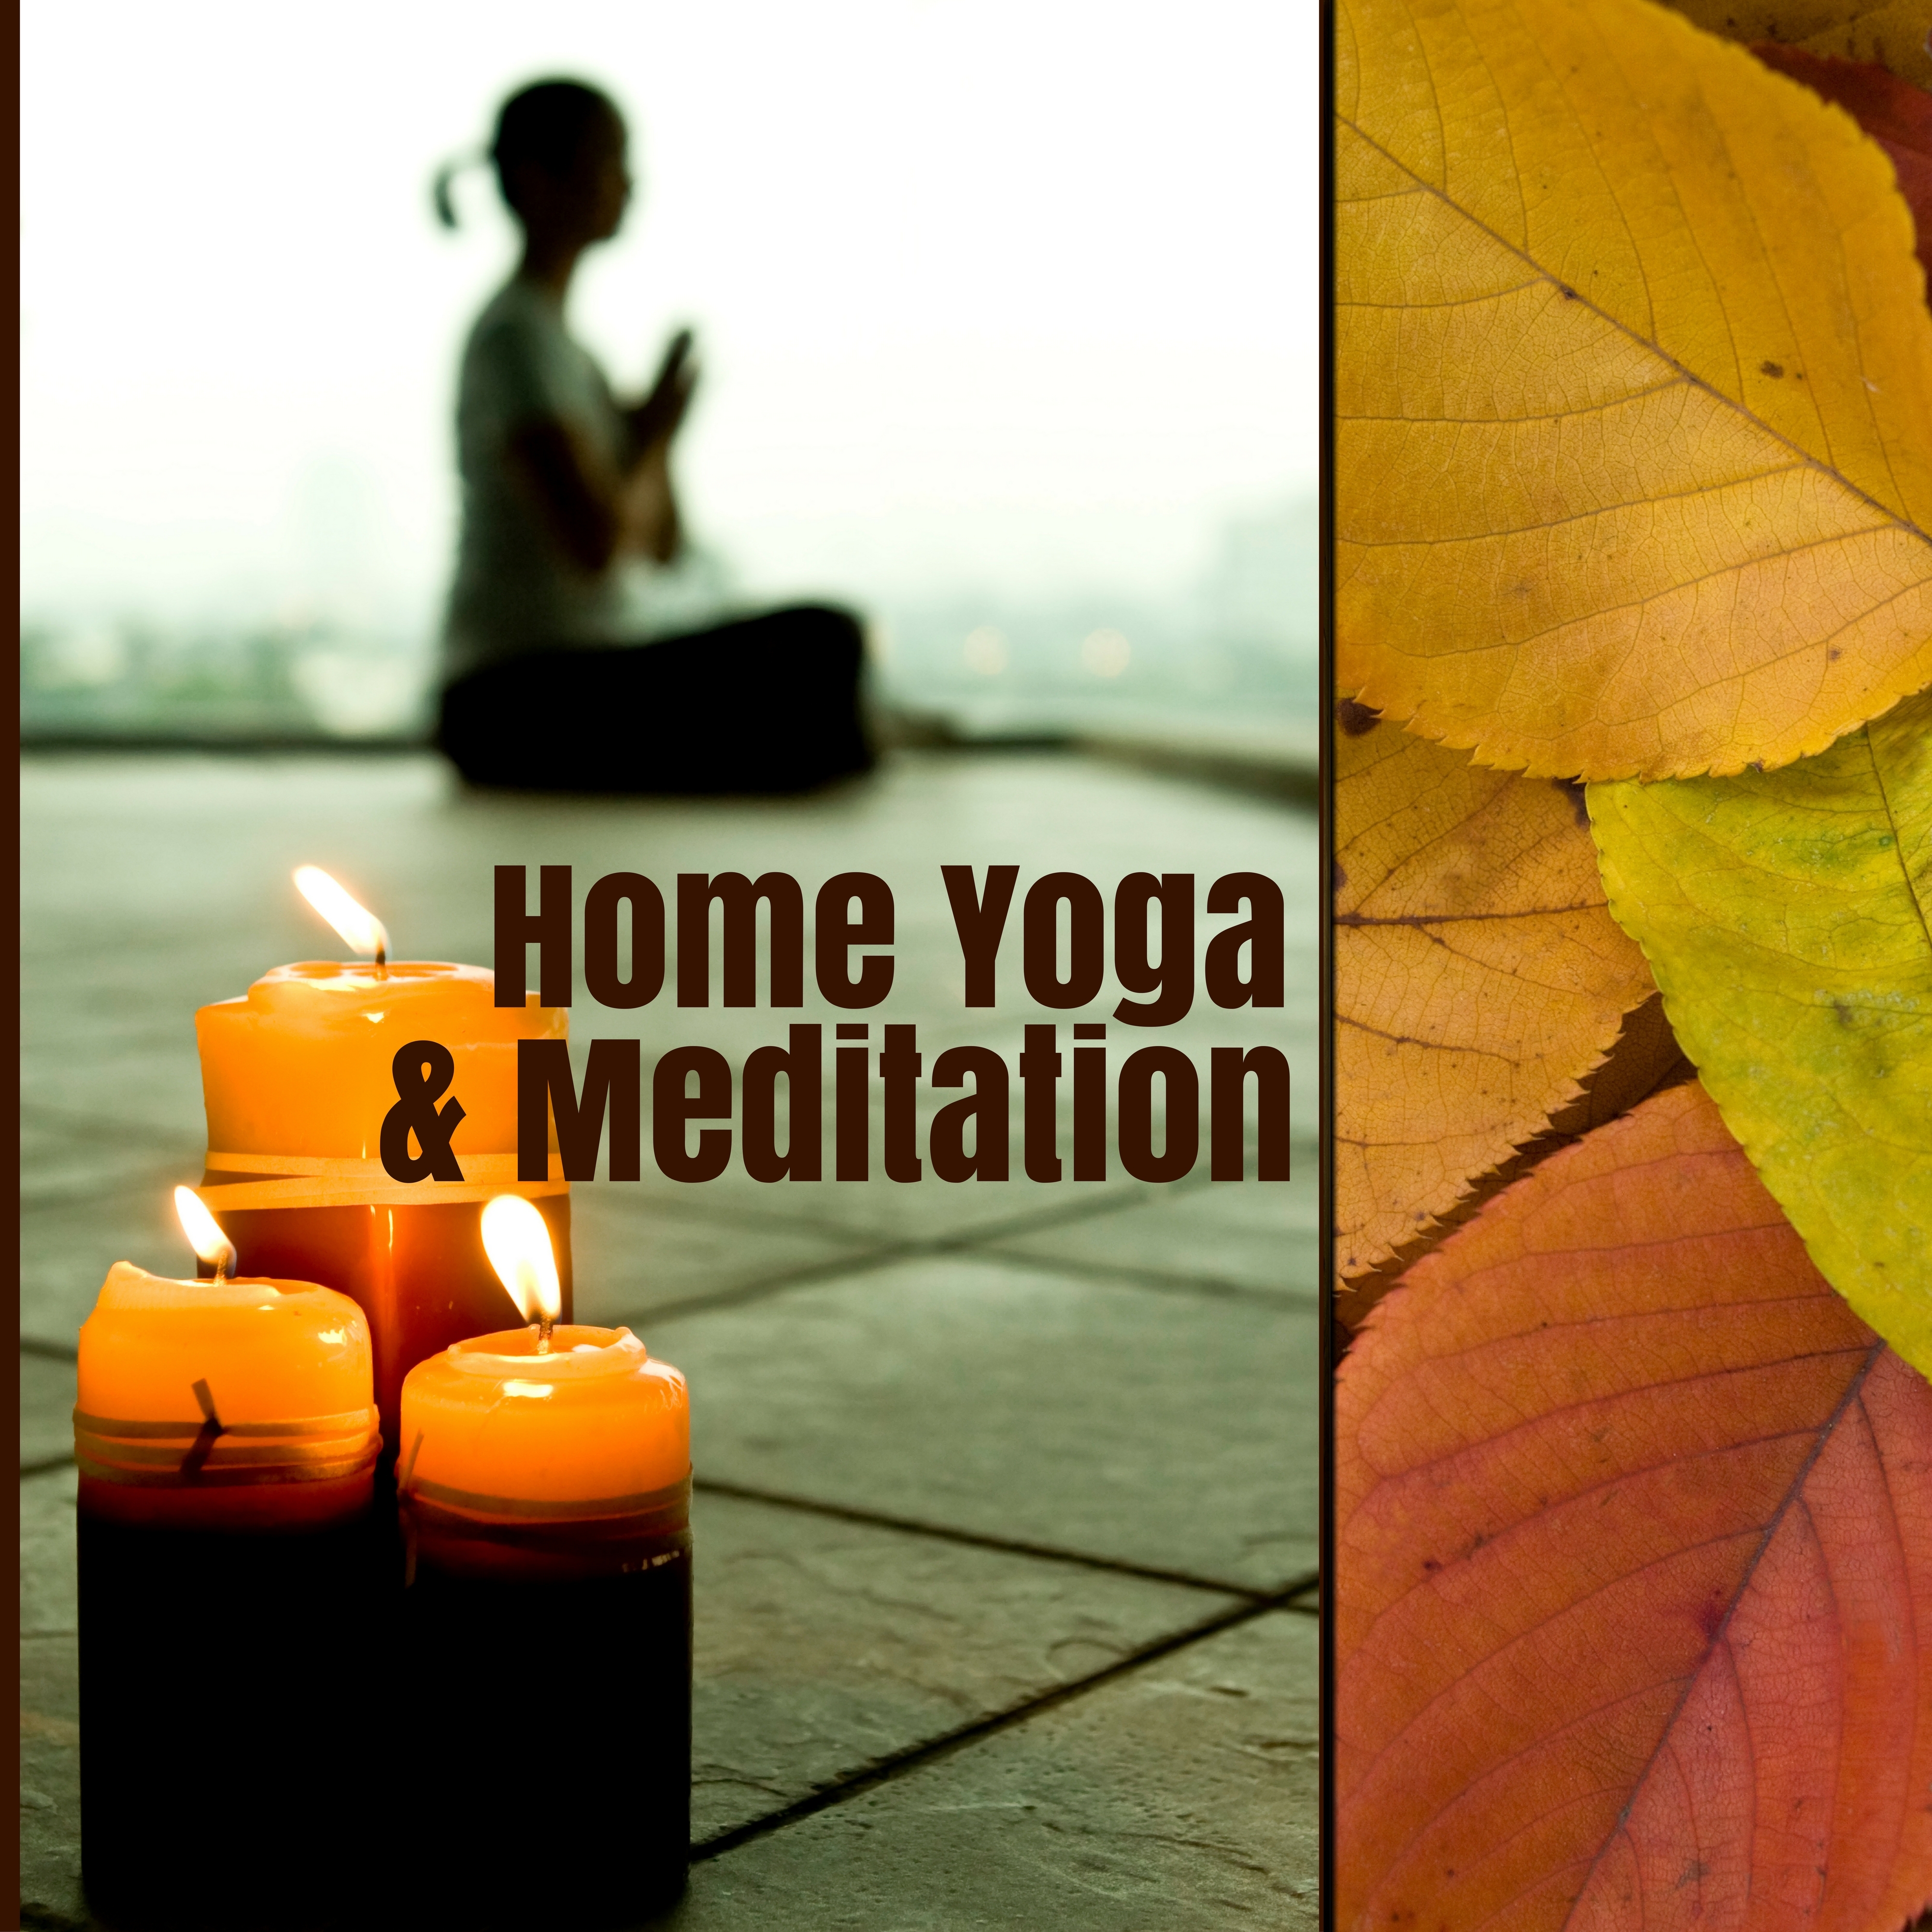 Home Yoga & Meditation -  New Age Instrumental Music and Queit Ambient Sounds